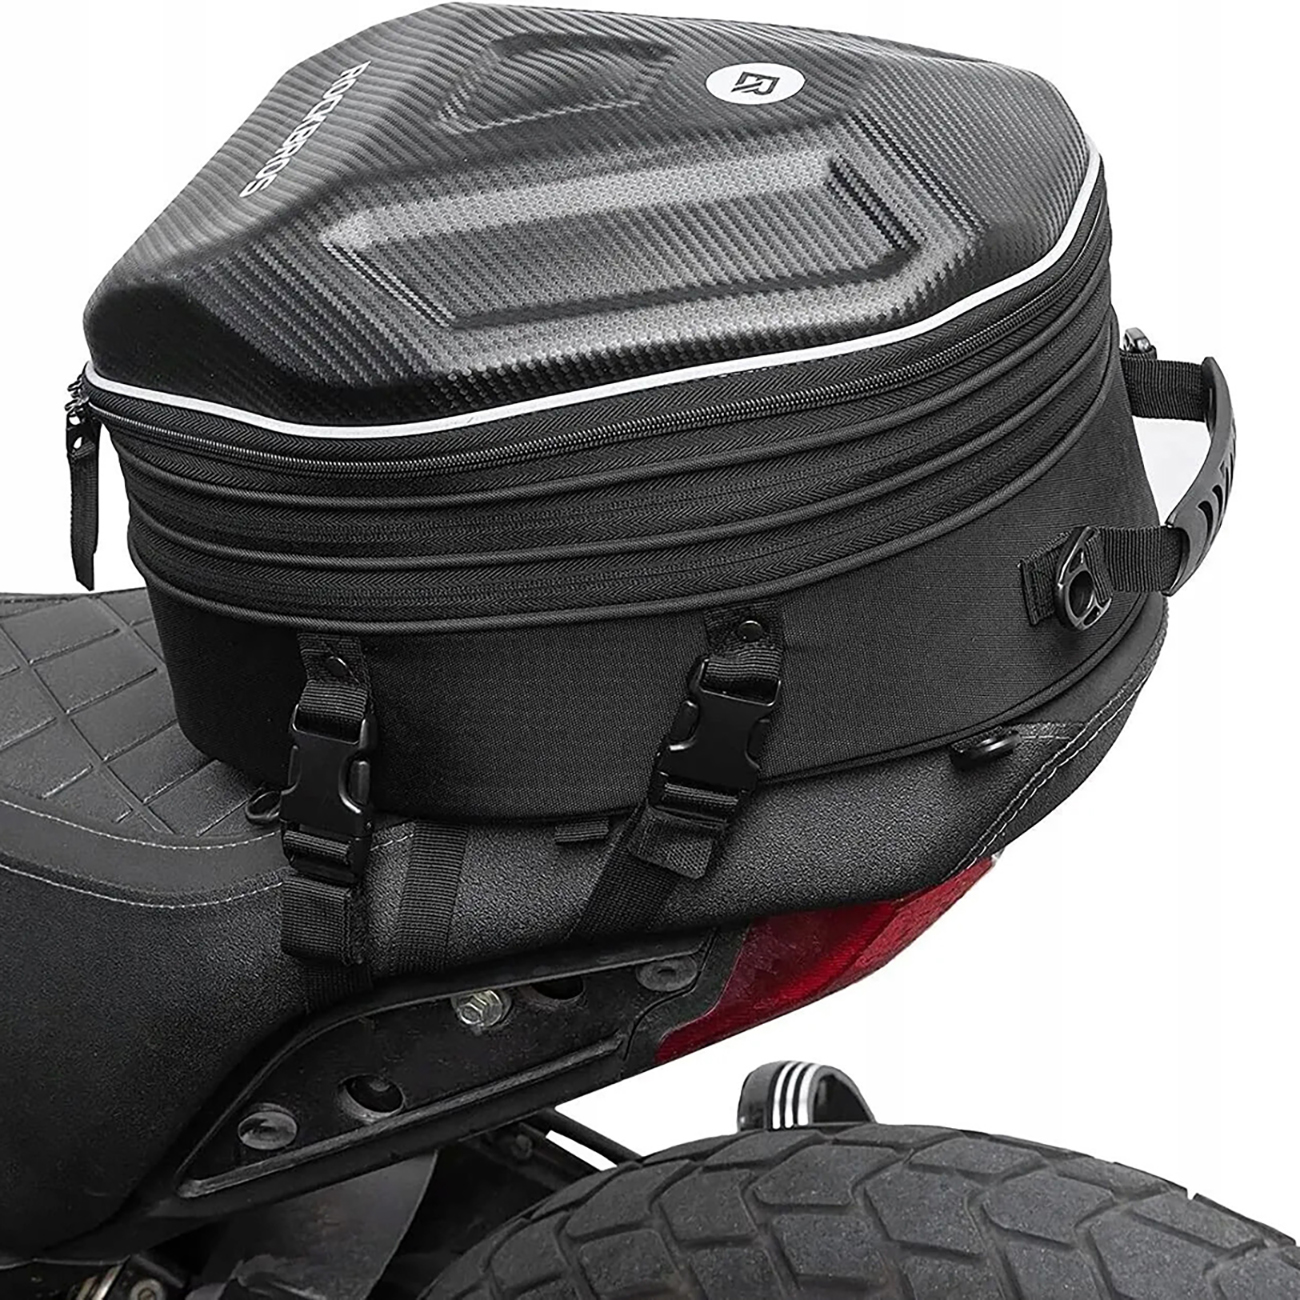 Rockbros 30140026001 motorcycle bag for 35 l tank on a white background